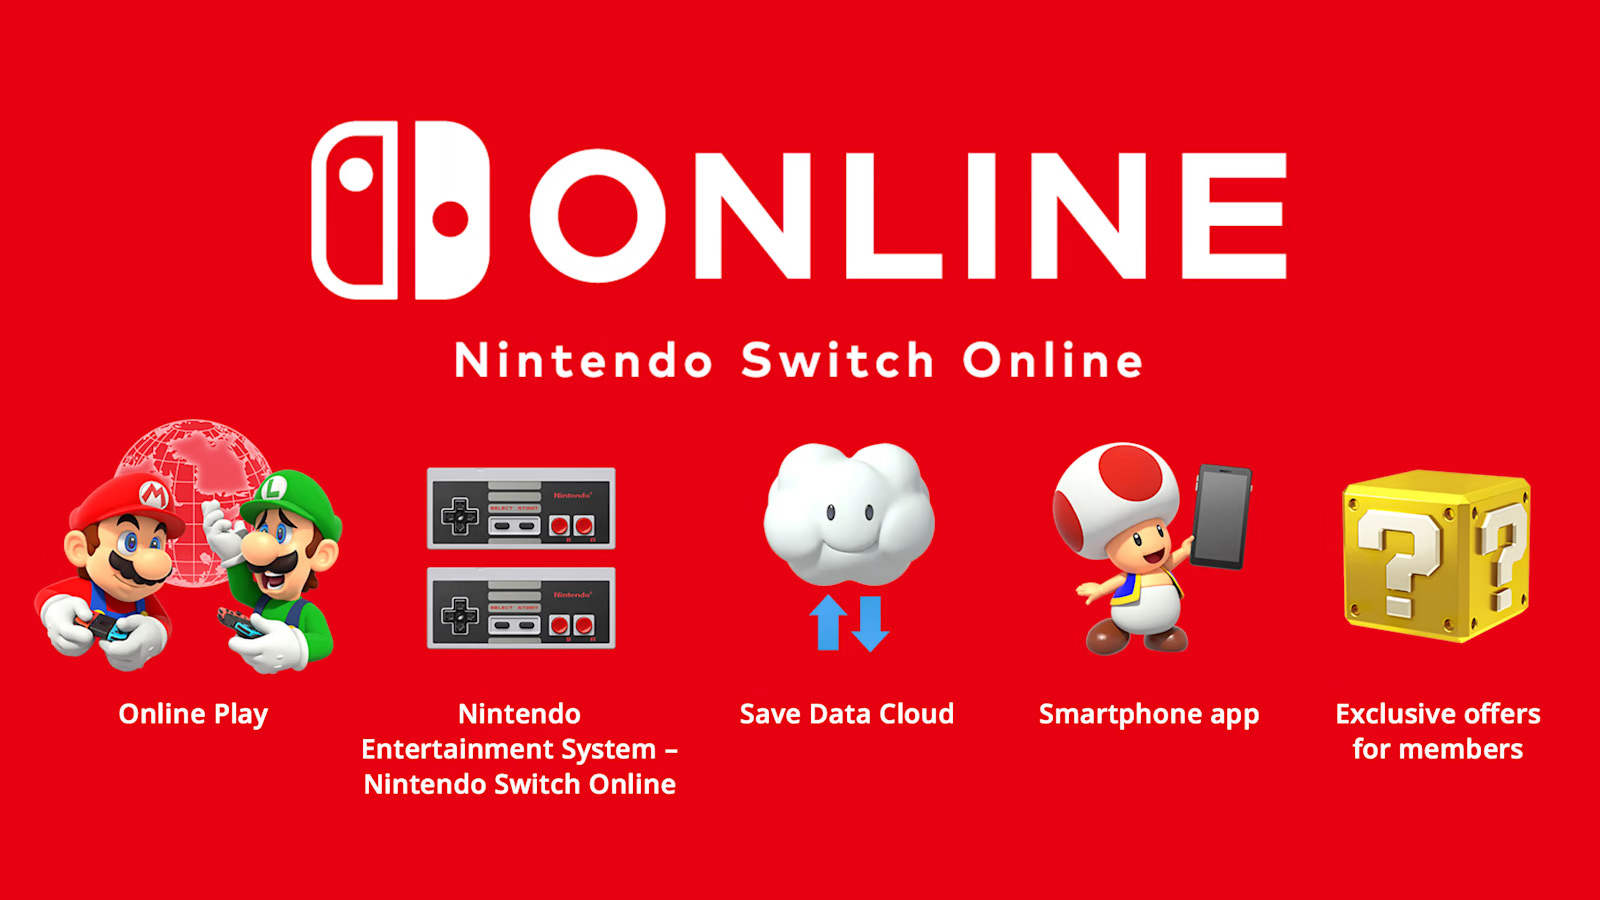 Benefits of Switch online, including online play, NES online, cloud saves, a smartphone app and exclusive offers.